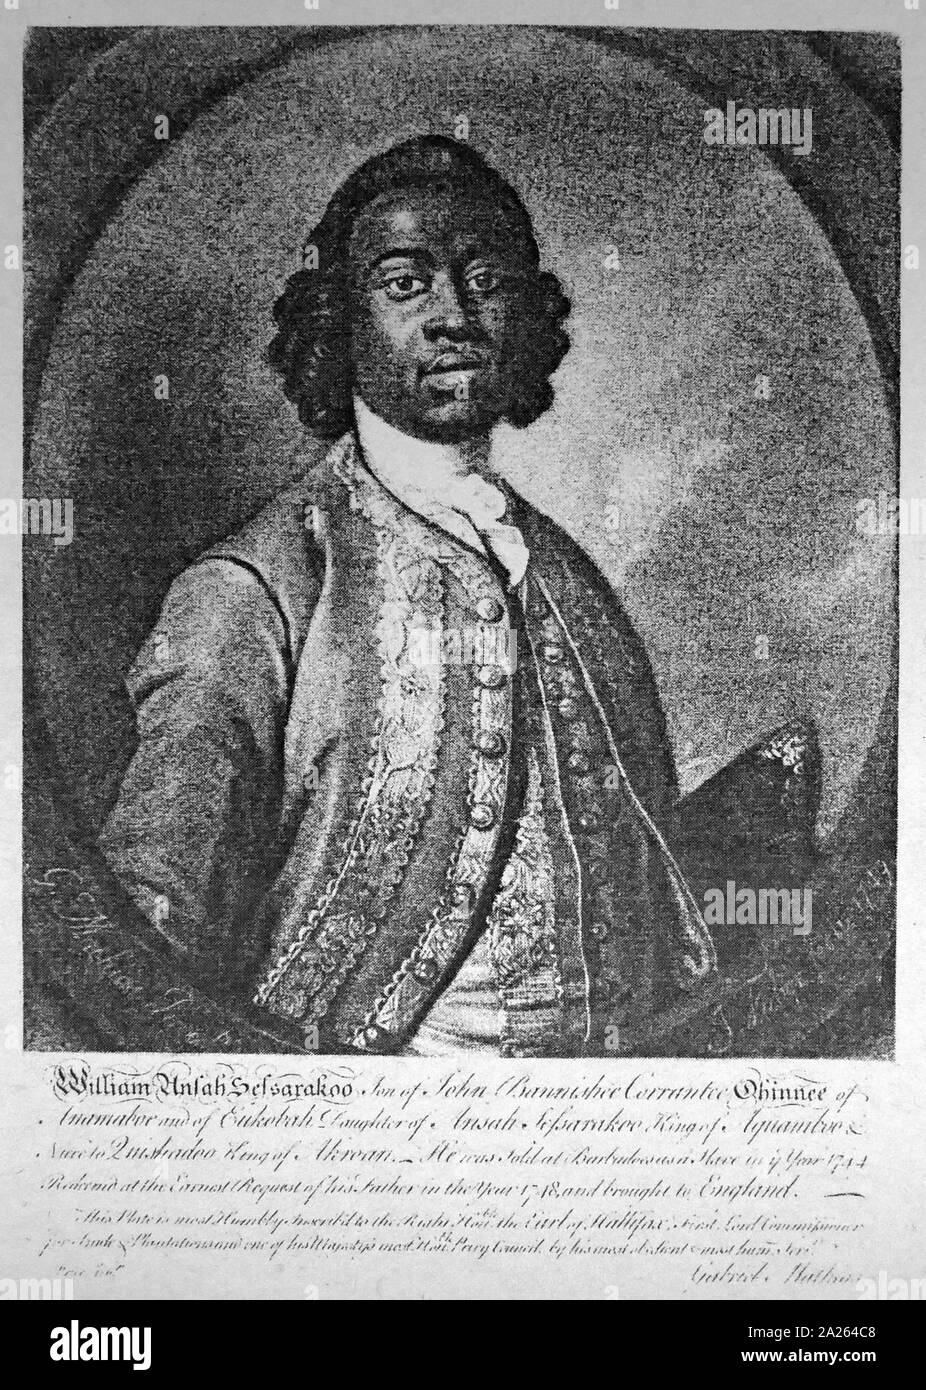 William Ansah Sessarakoo (c. 1736–1770), a prominent 18th-century Ghanaian, is best known for his wrongful enslavement in the West Indies and a diplomatic mission to England. He was both prominent among the Fante people and influential among Europeans concerned with the transatlantic slave trade. Stock Photo